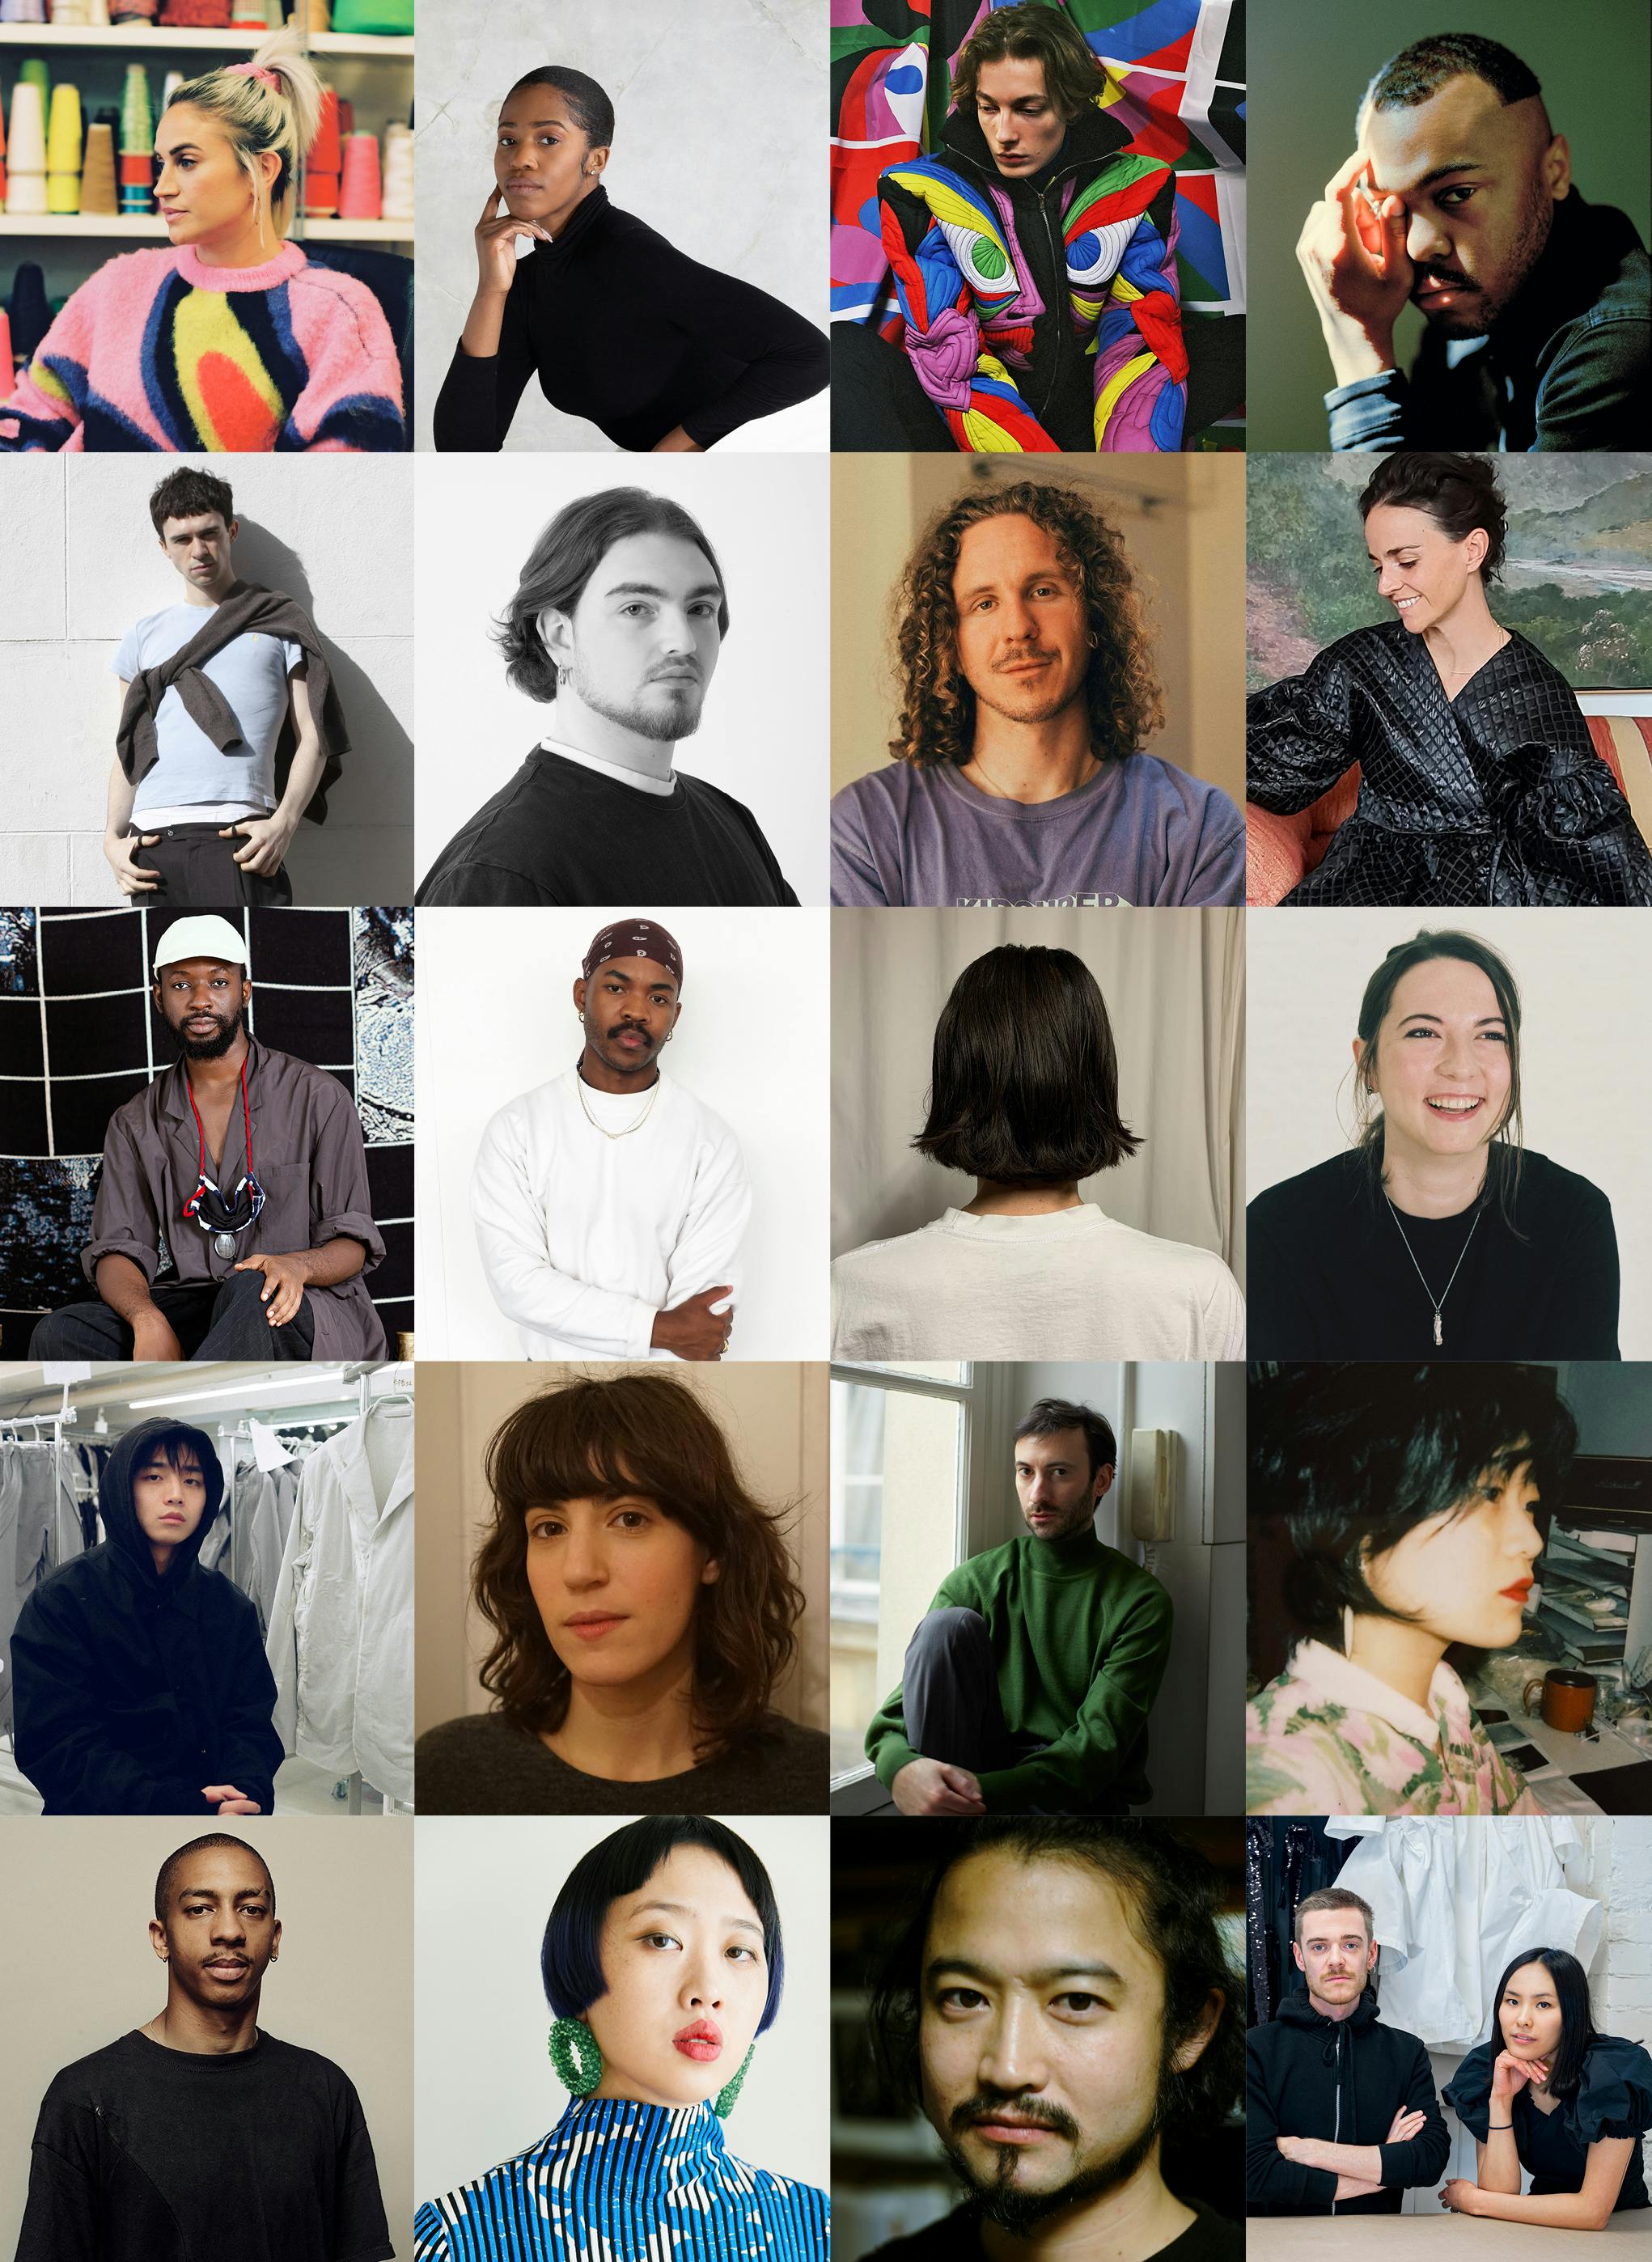 This Year's LVMH Prize Finalists Have Been Announced